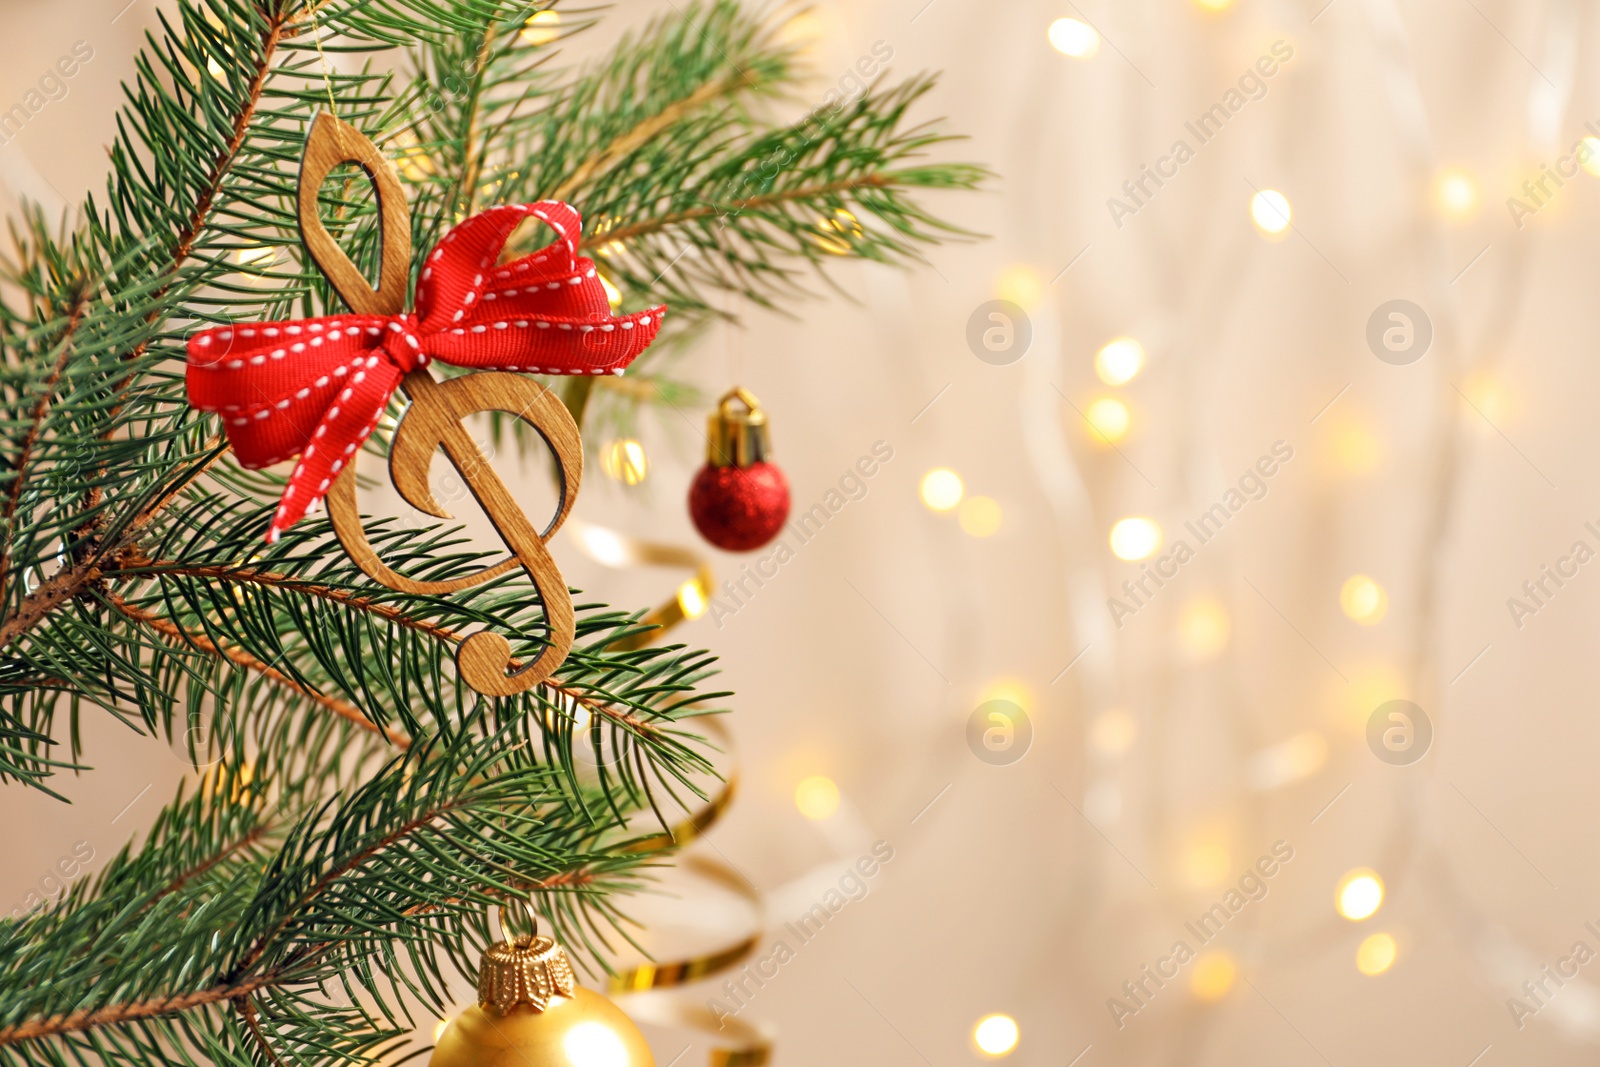 Photo of Fir tree branch with wooden treble clef on blurred background. Christmas music concept